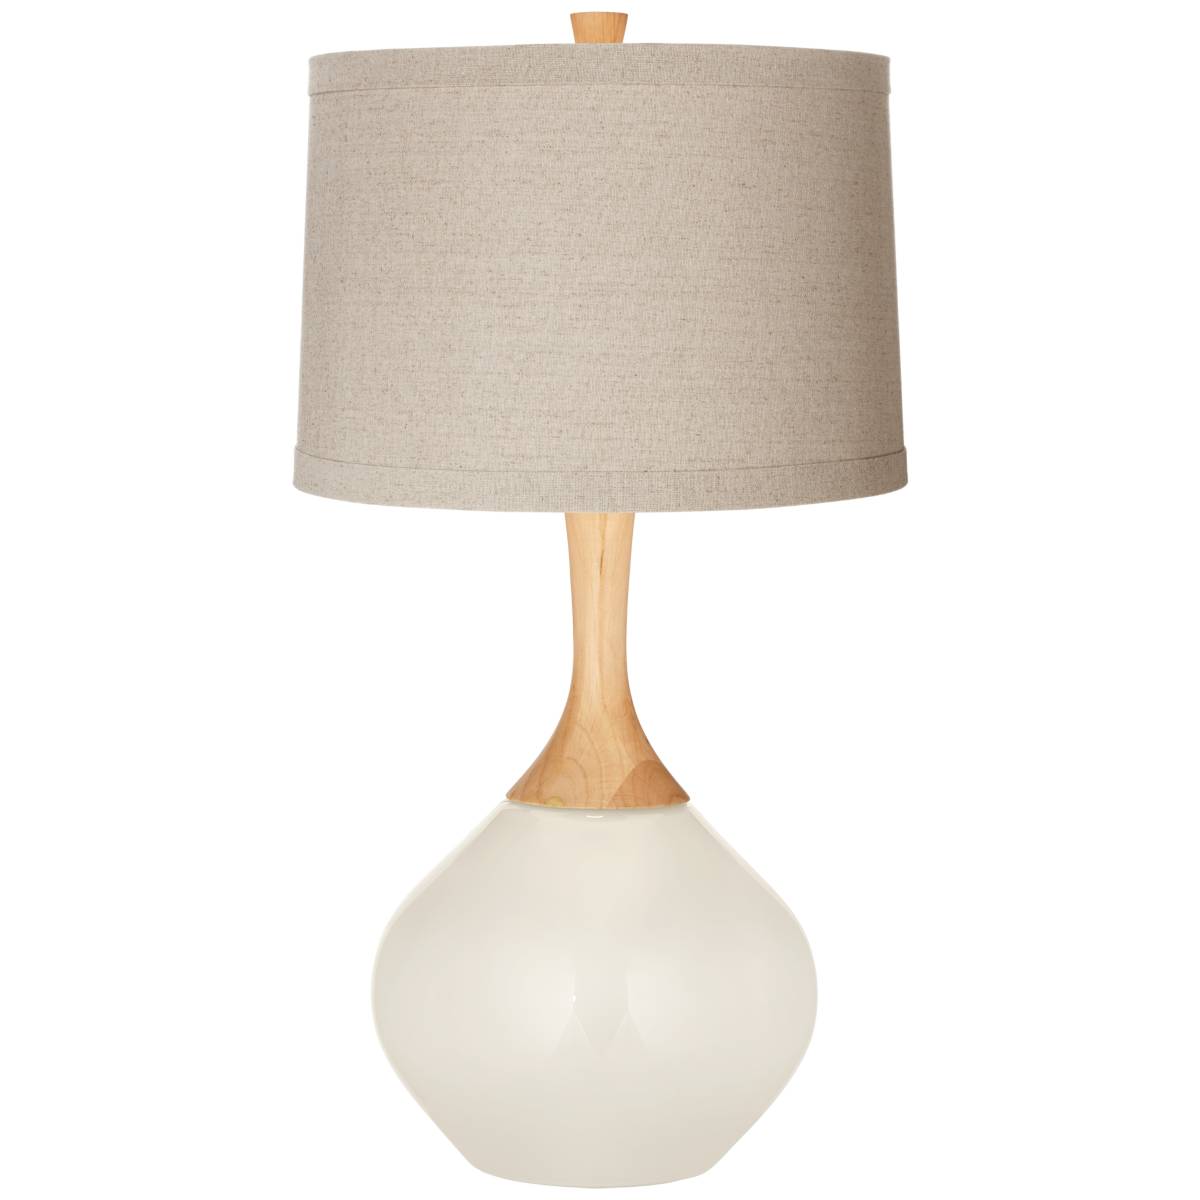 31 In. - 35 In. Table Lamps - Page 9 | Lamps Plus